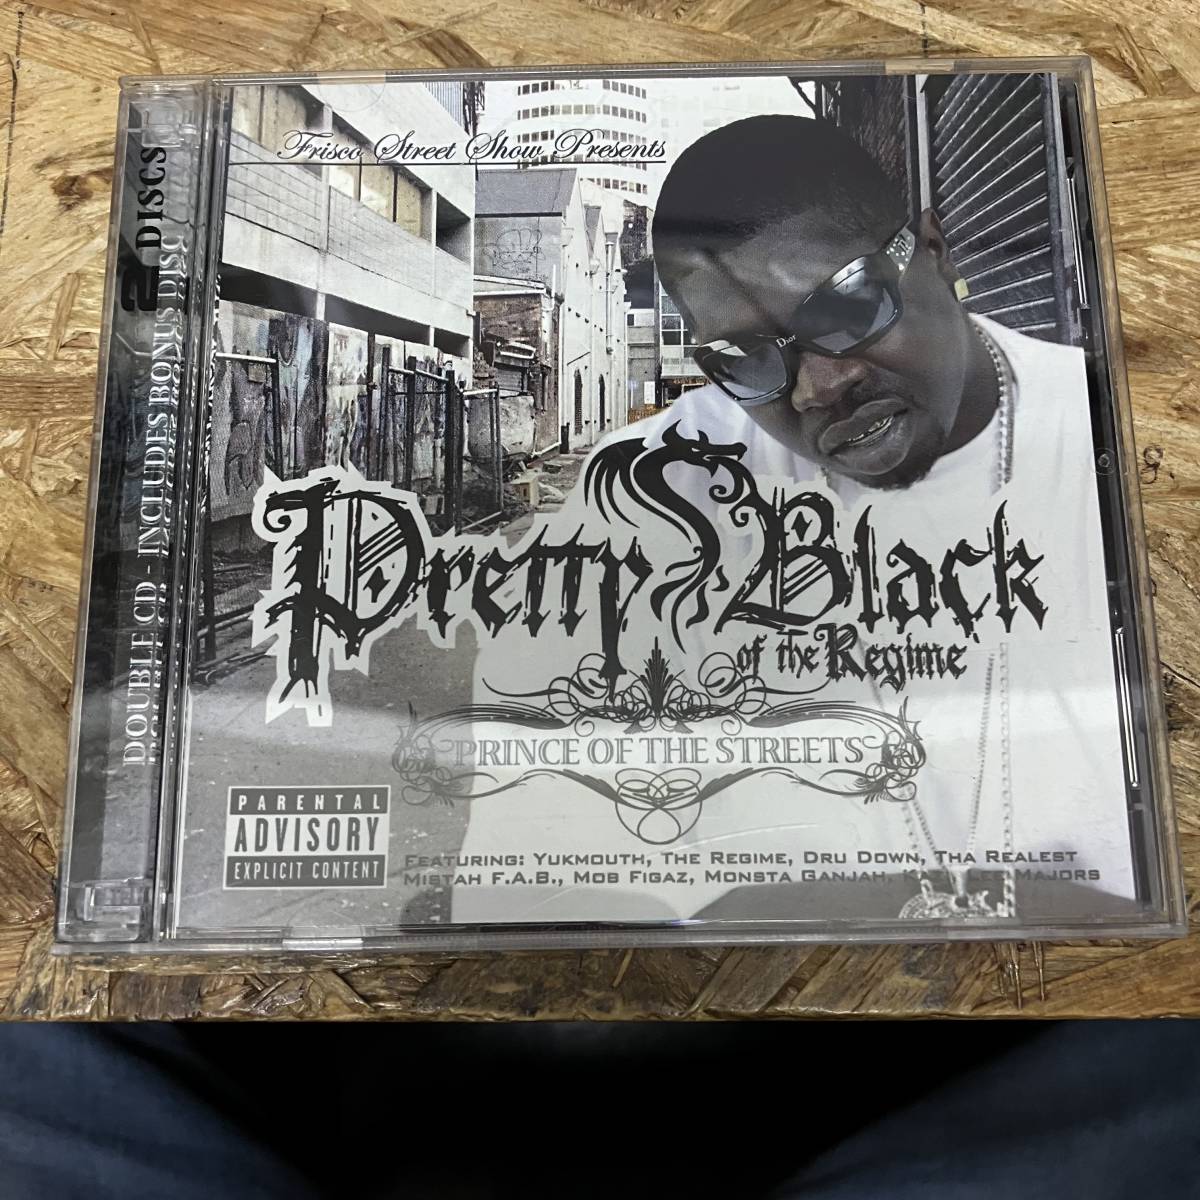 ● HIPHOP,R&B PRETTY BLACK OF THE REGIME - PRINCE OF THE STREETS アルバム,G-RAP! CD 中古品_画像1